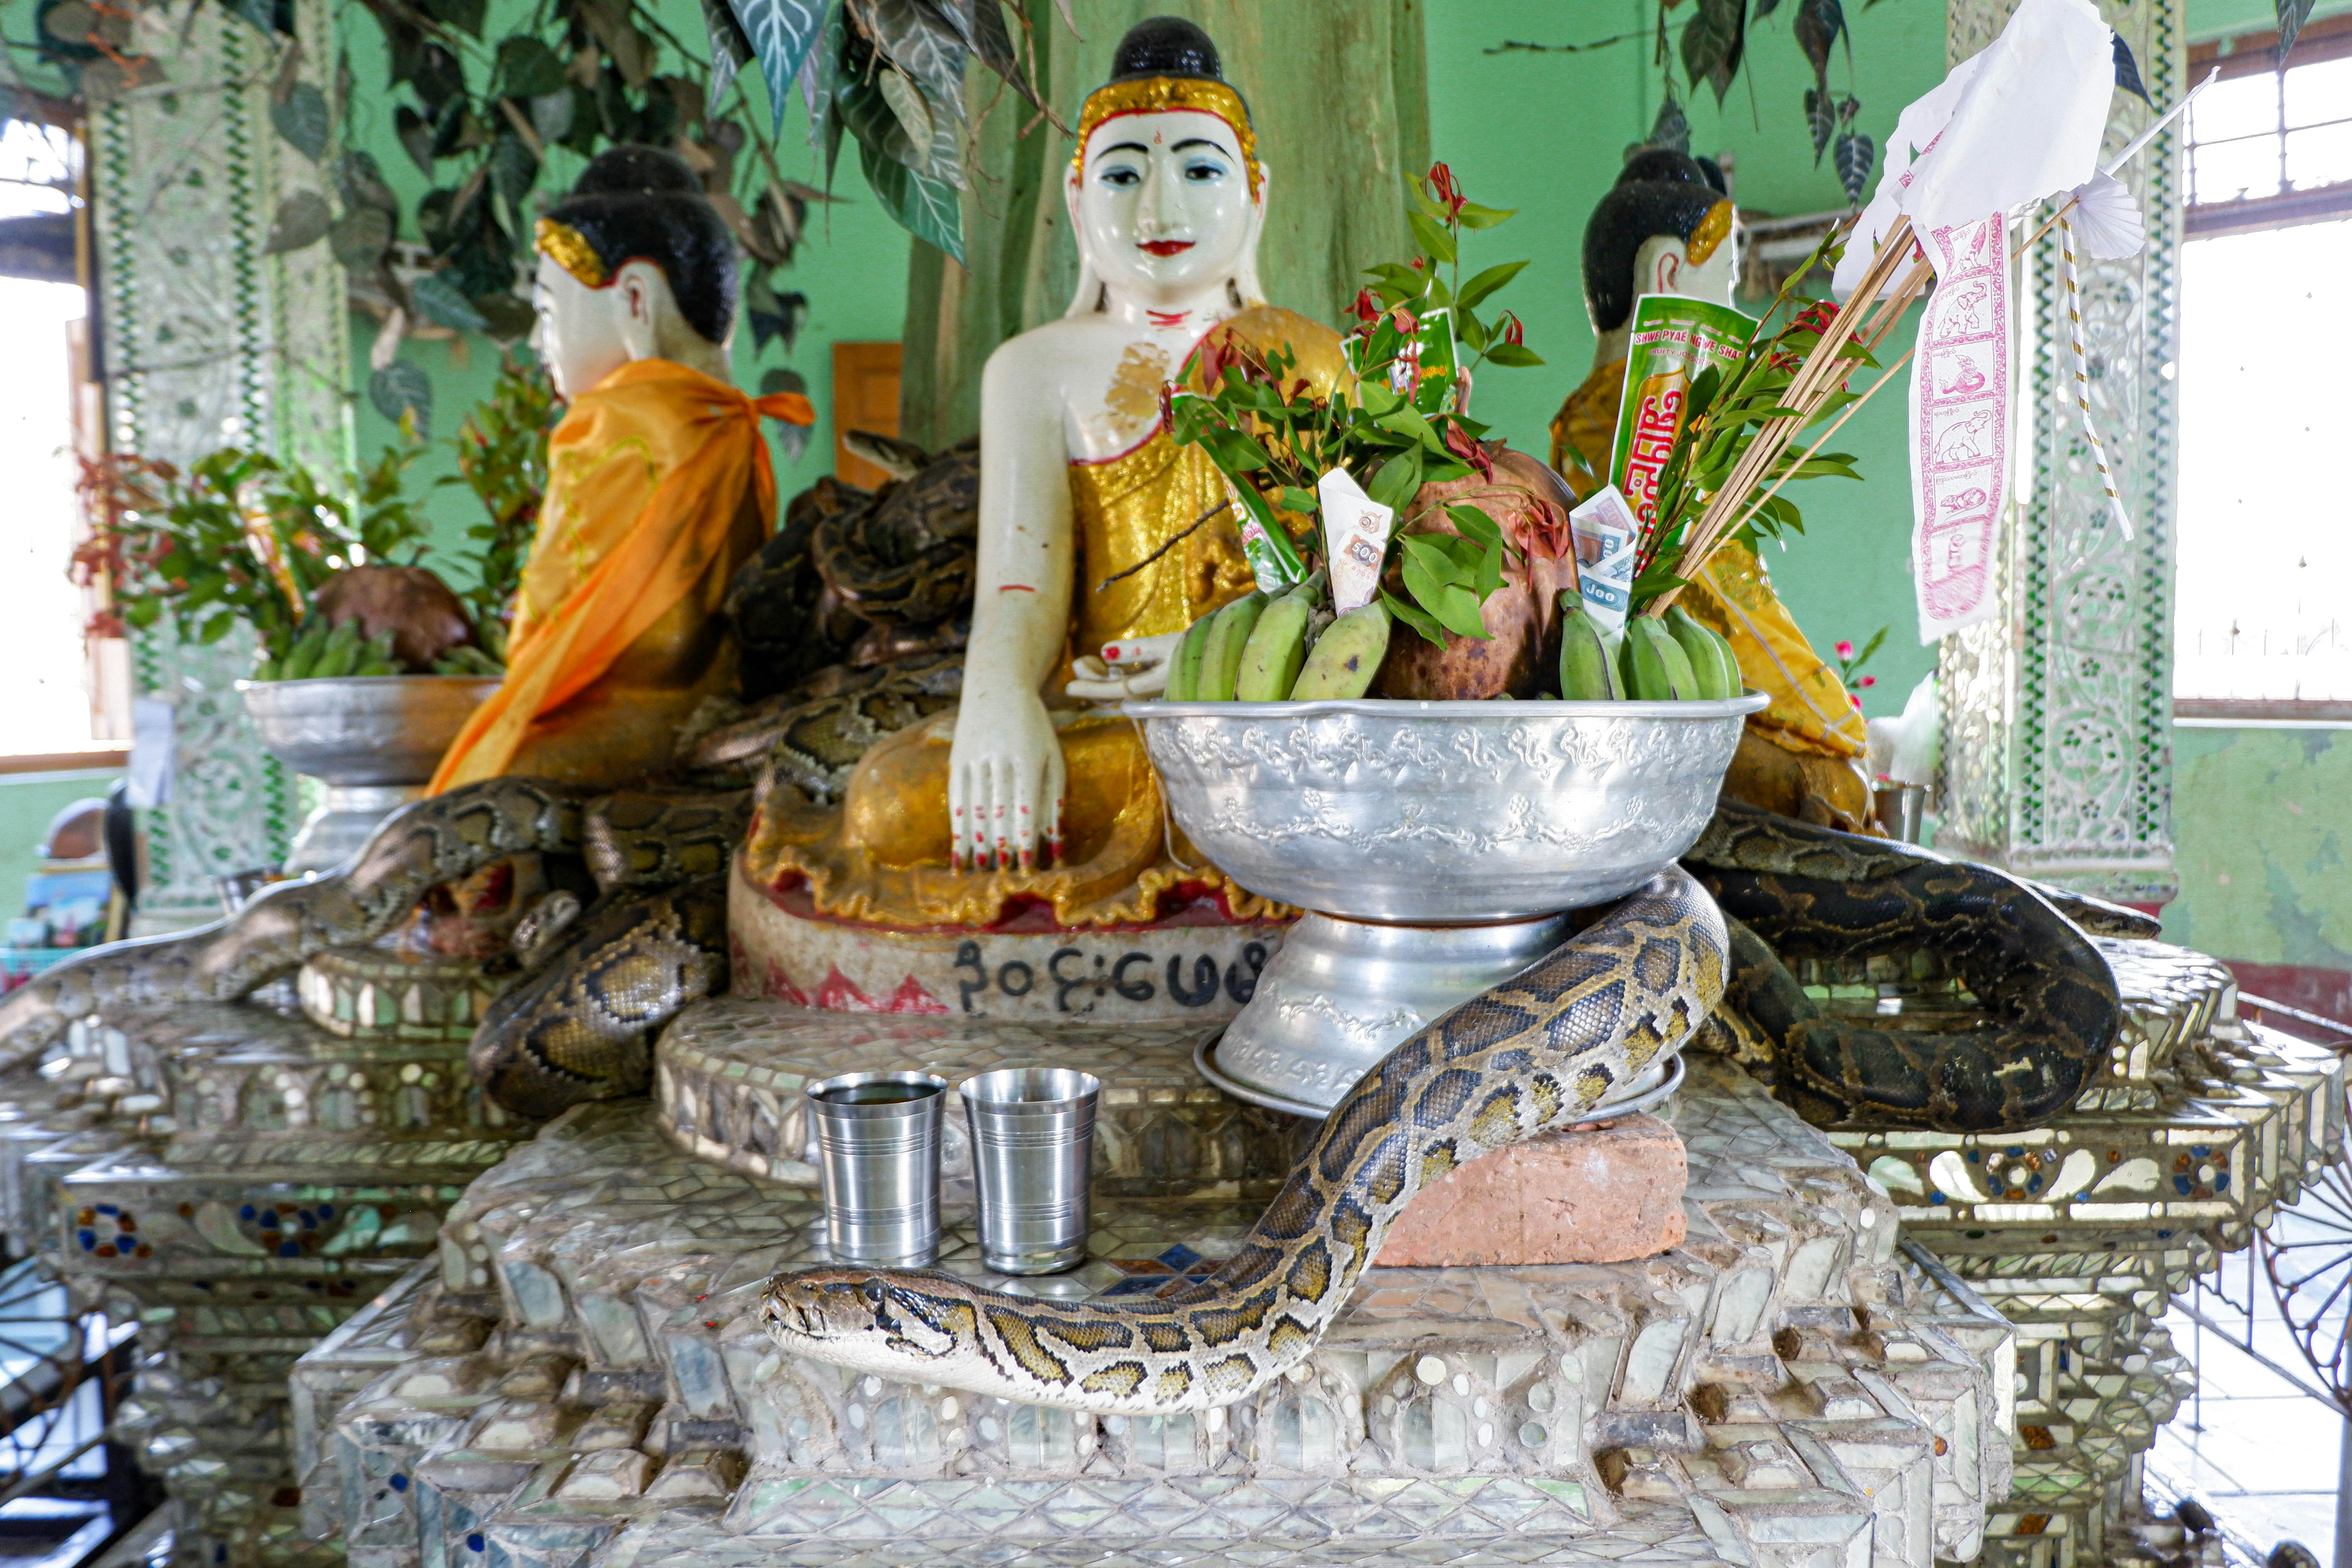 The interior of Baung Daw Gyoke temple in Myanmar. The centre of the temple has a stand adorned with religious iconography, around which several large snakes are wound. One unfurls towards the camera.